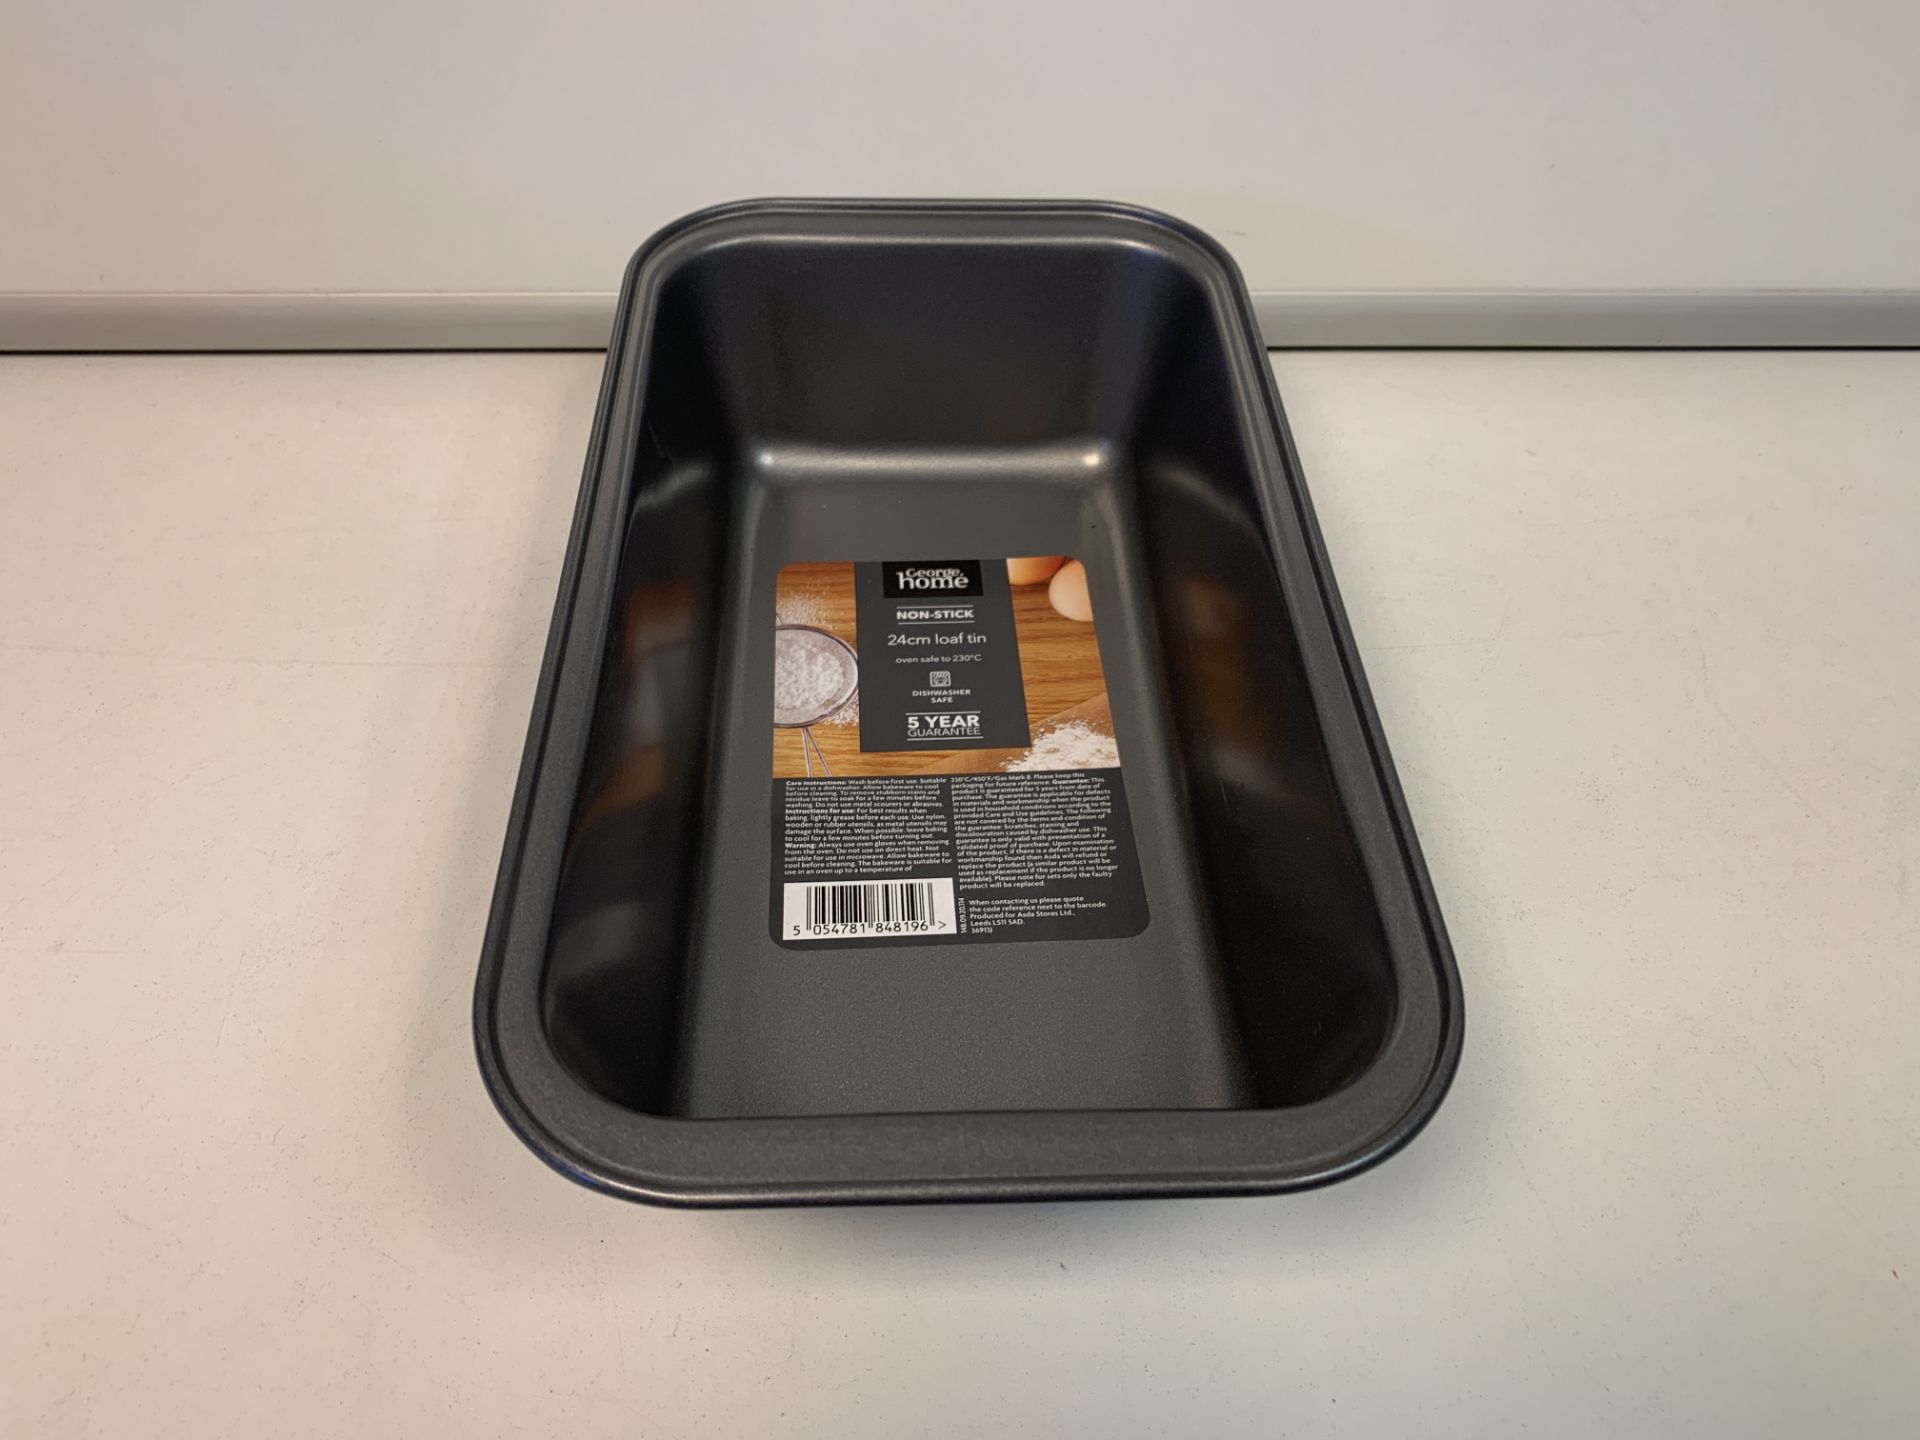 30 X NEW GEORGE HOME NON-STICK 24CM LOAD TINS. DISHWASHER SAFE (P/R)